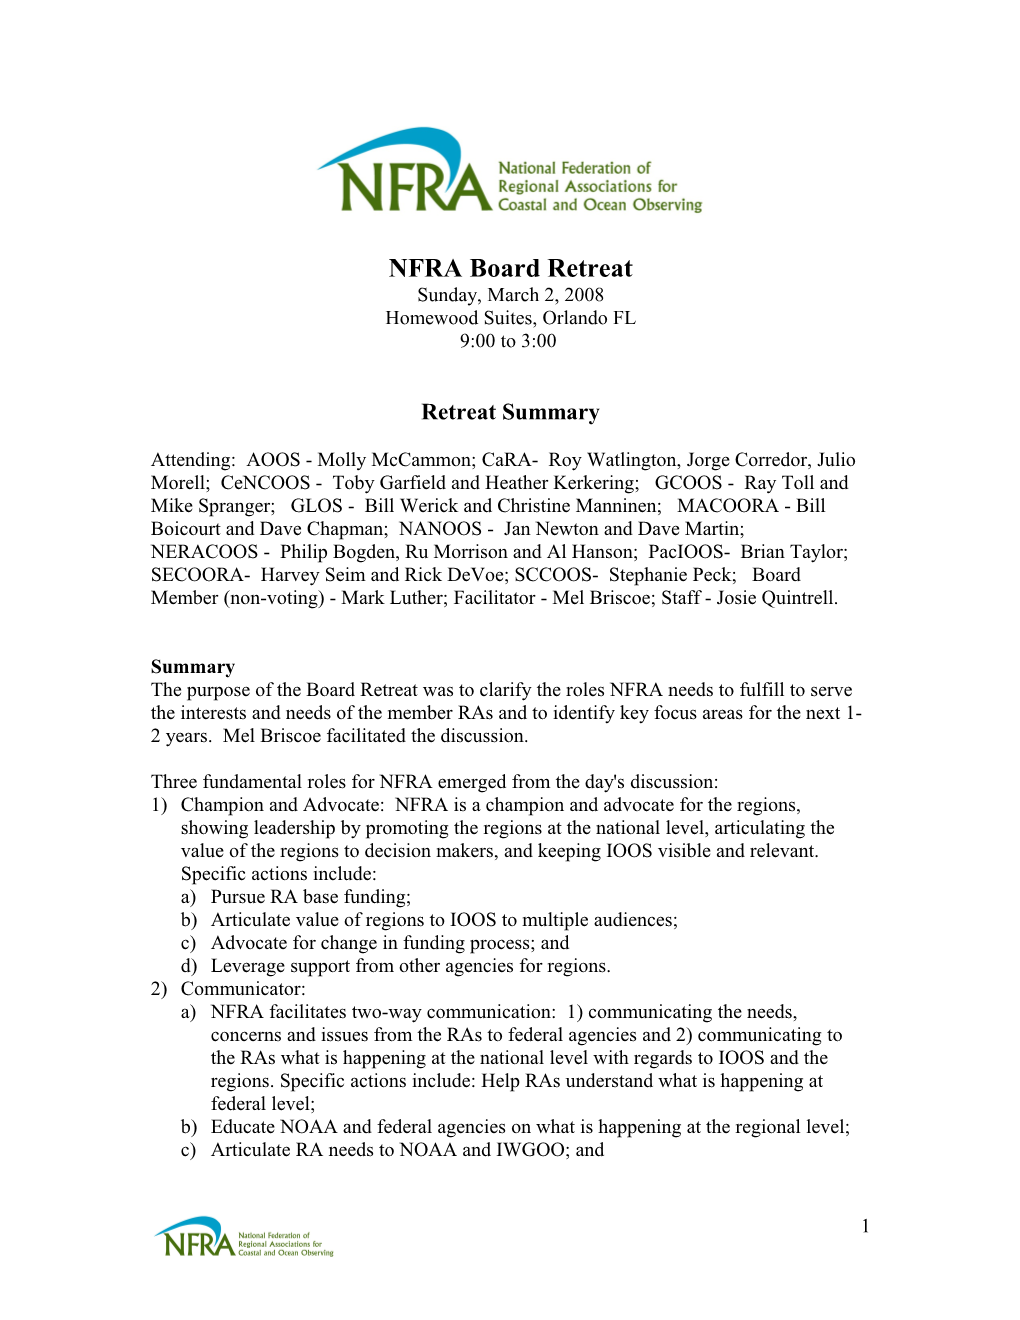 NFRA Board Retreat Sunday March 2